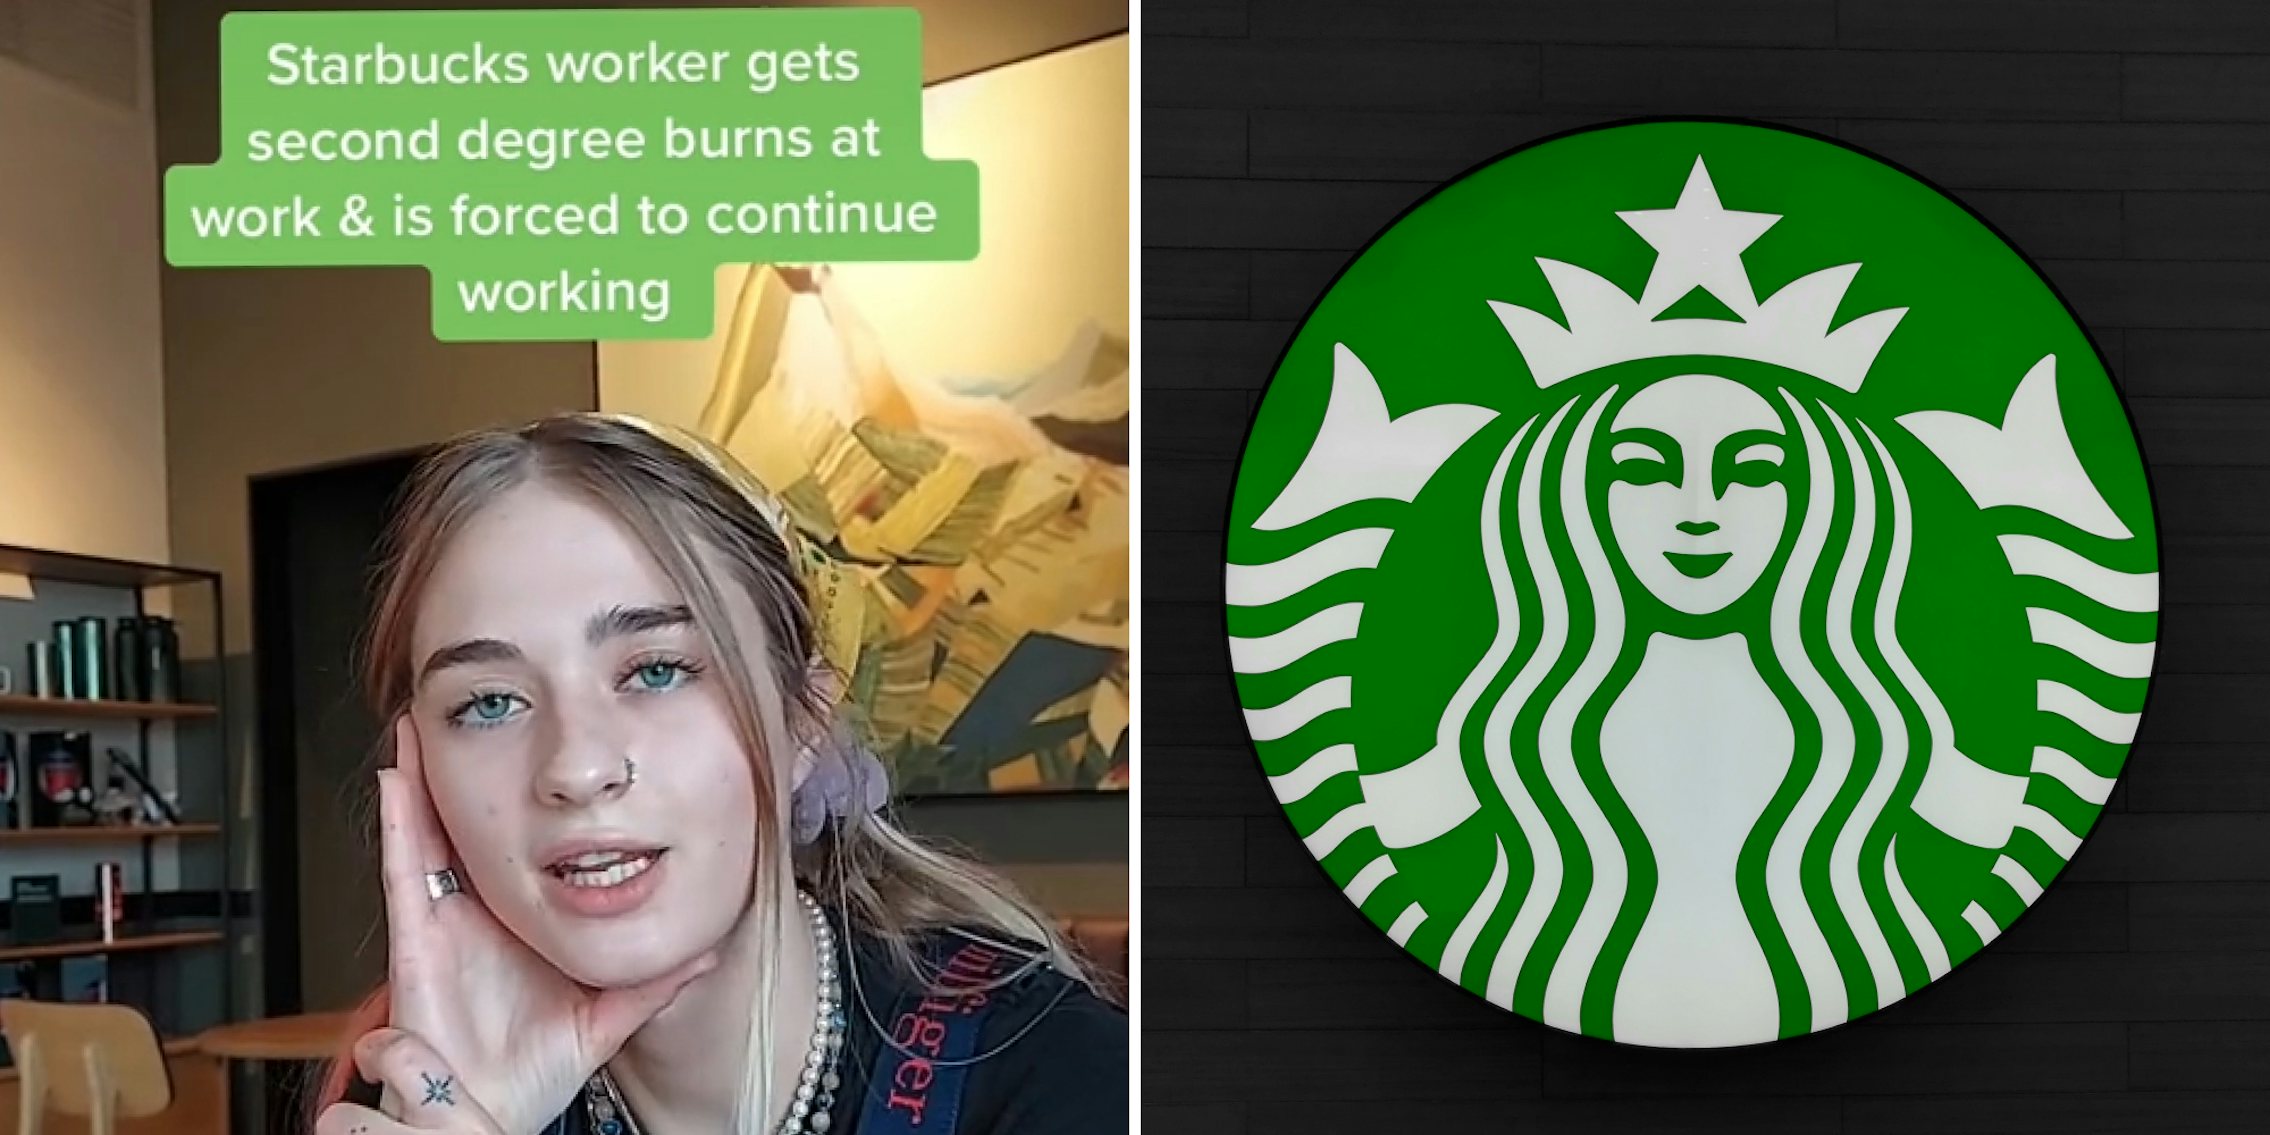 Woman hand on side of face caption 'Starbucks worker gets second degree burns at work & is forced to continue working (l) starbucks circular logo over black wood background (r)